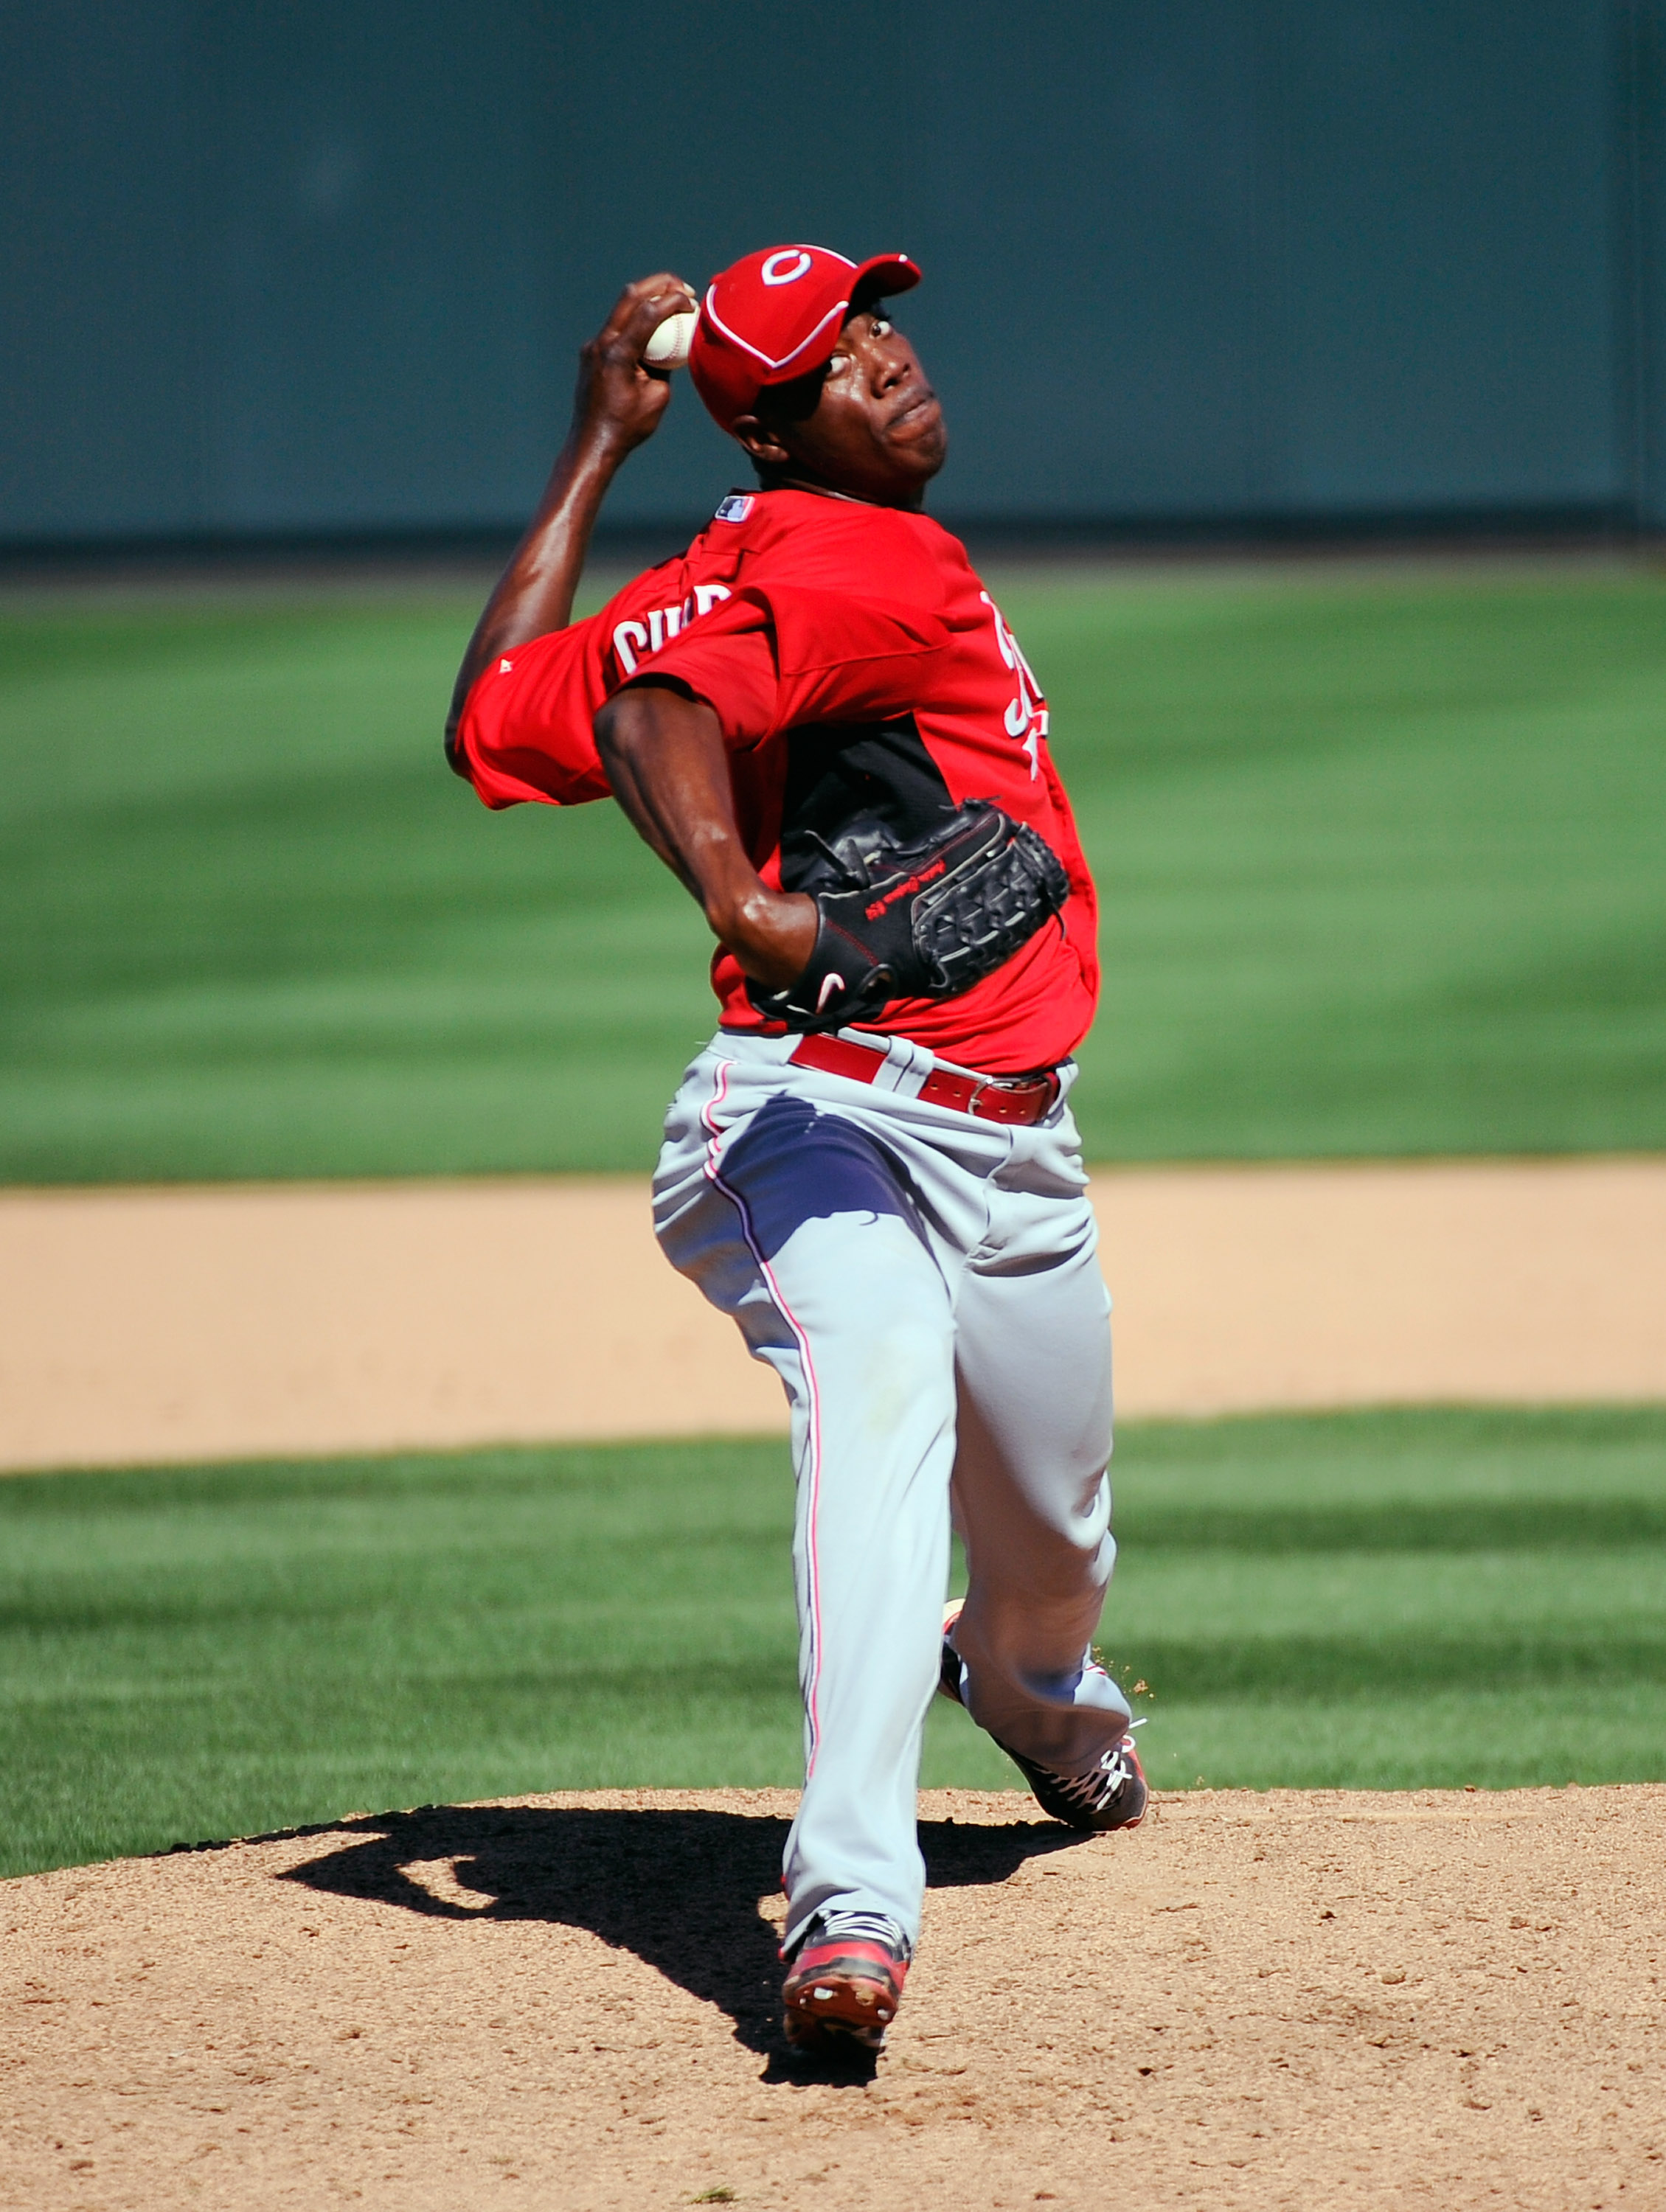 SCOTTSDALE, AZ - MARCH 14:  Pitcher Aroldis Chapman #54 of the Cincinnati Reds against the Colorodo Rockies during the spring training baseball game at Salt River Fields at Talking Stick on March 14, 2011 in Scottsdale, Arizona.  (Photo by Kevork Djansezi